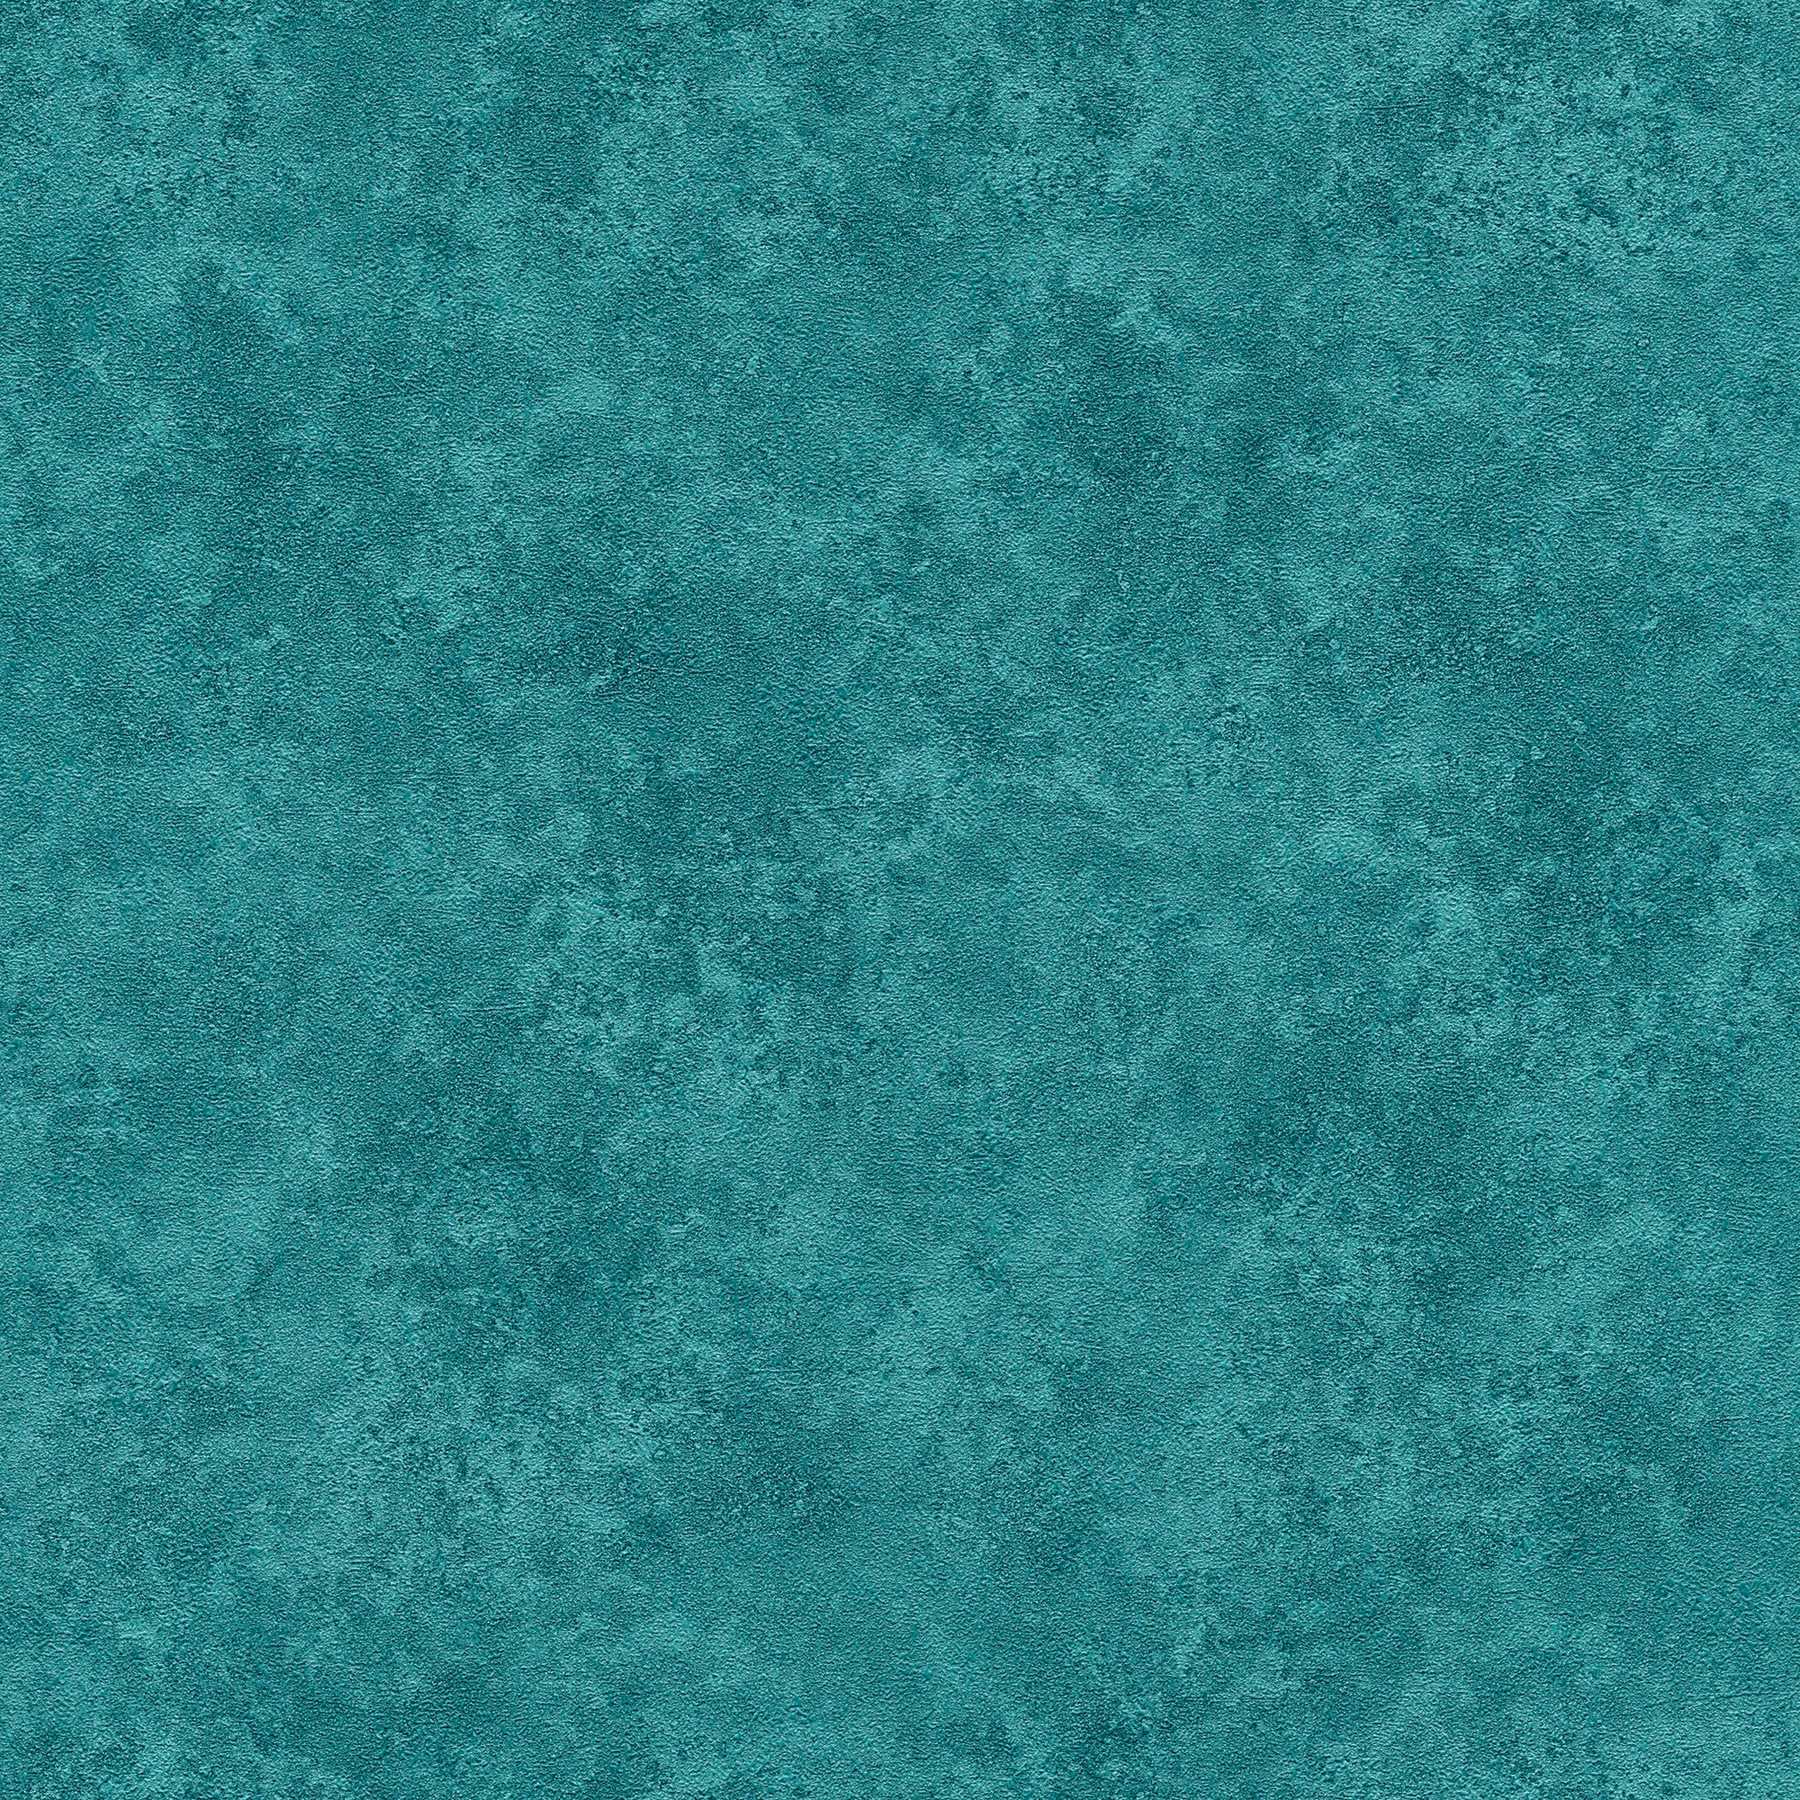 Plain wallpaper colour shaded, natural texture pattern - turquoise, blue, green
